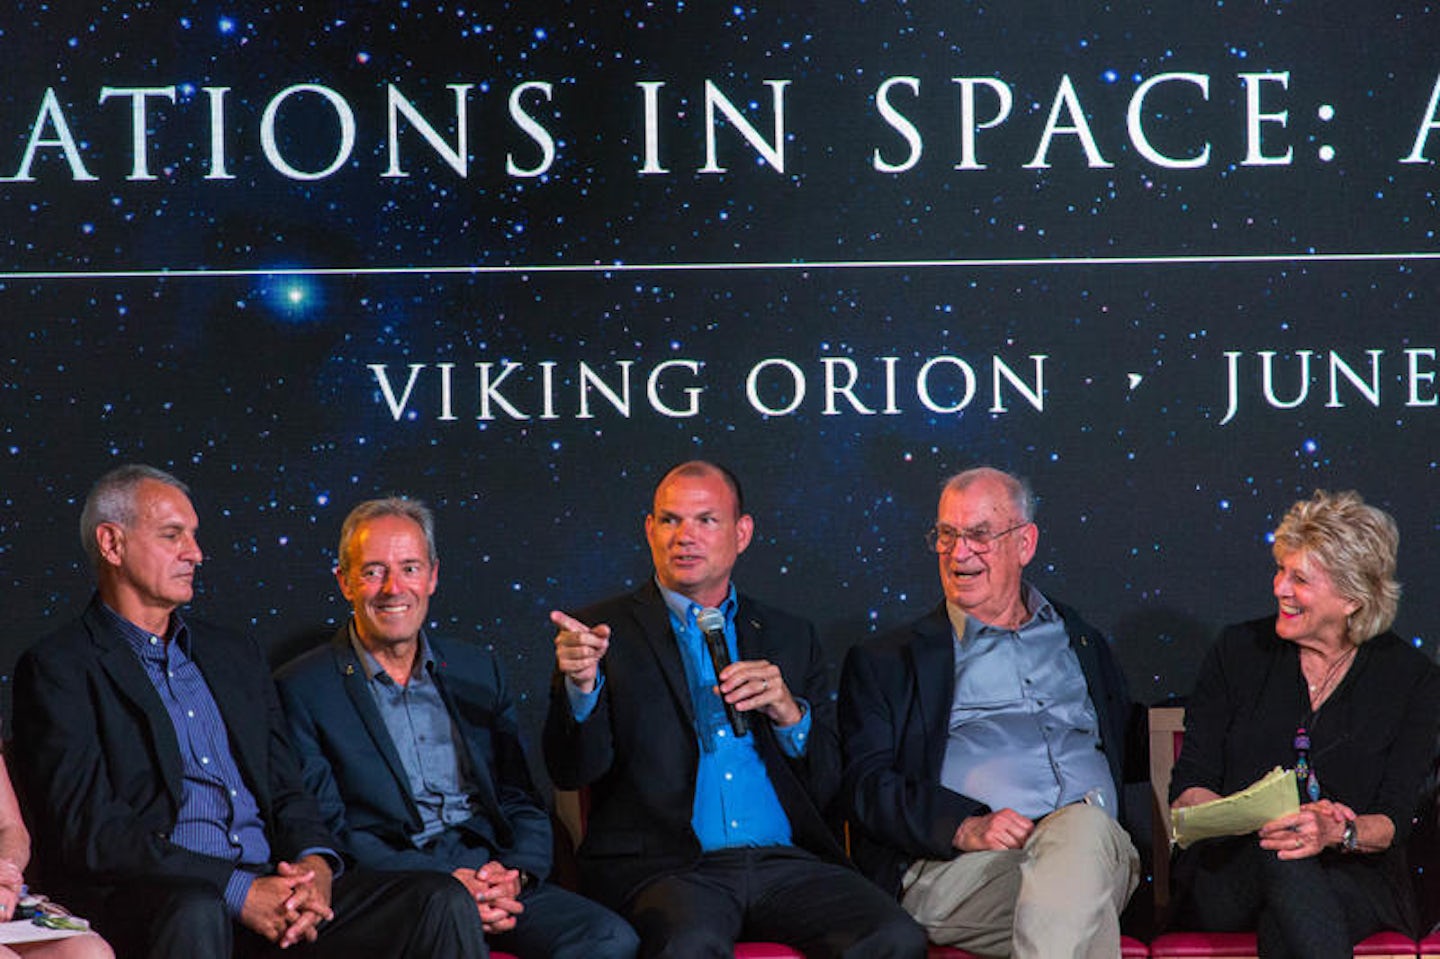 Exploration In Space - a conversation on Viking Orion